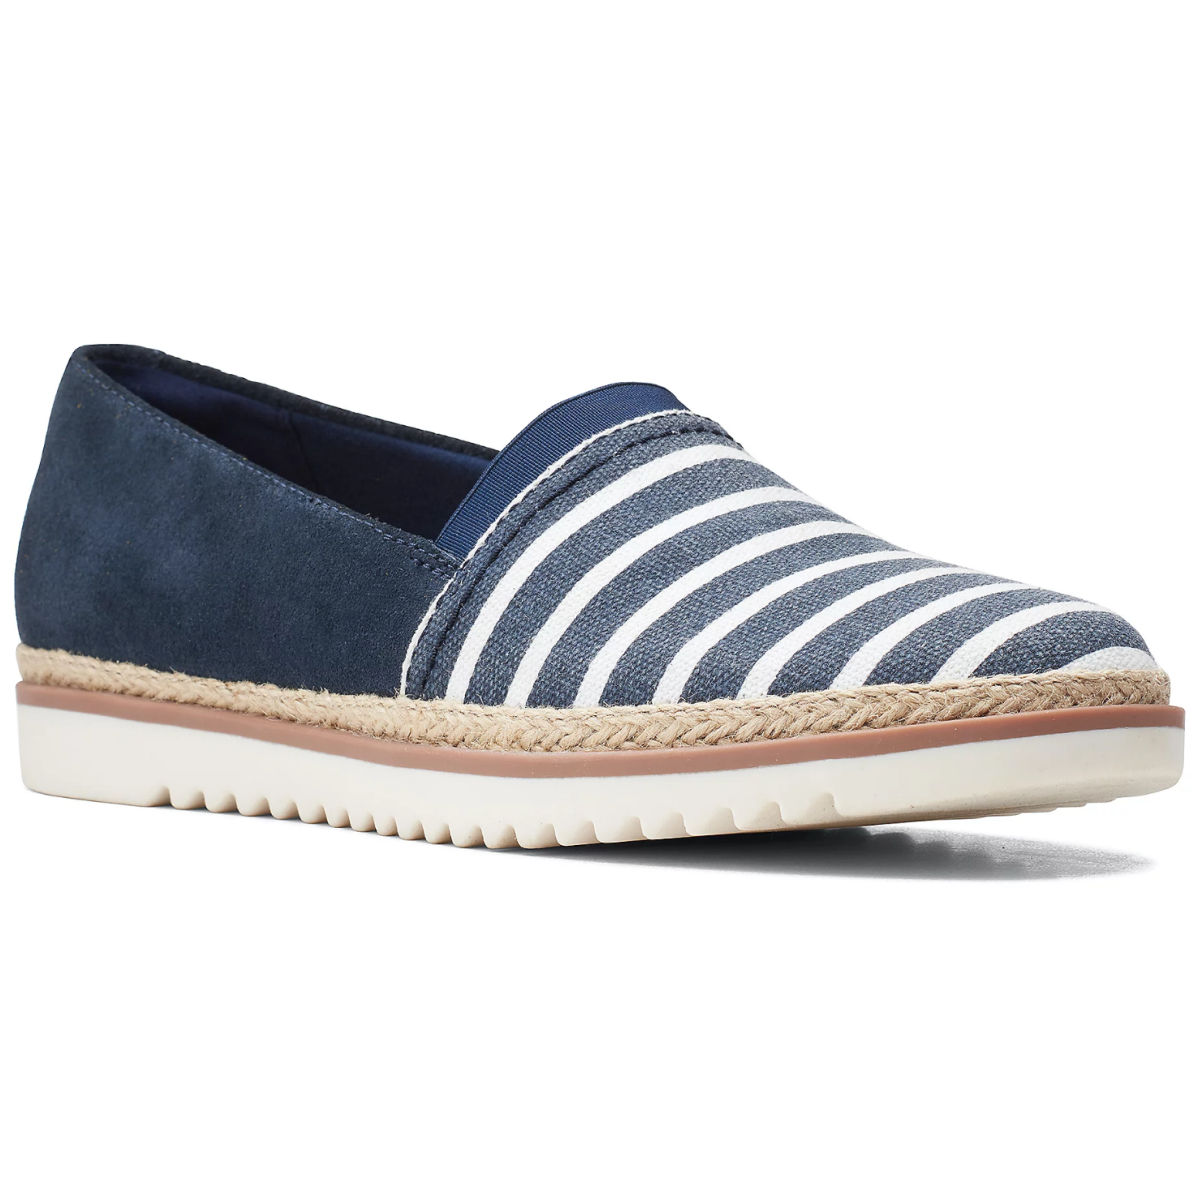 Clarks Collection Serena Paige Leather or Suede Women's Slip-Ons